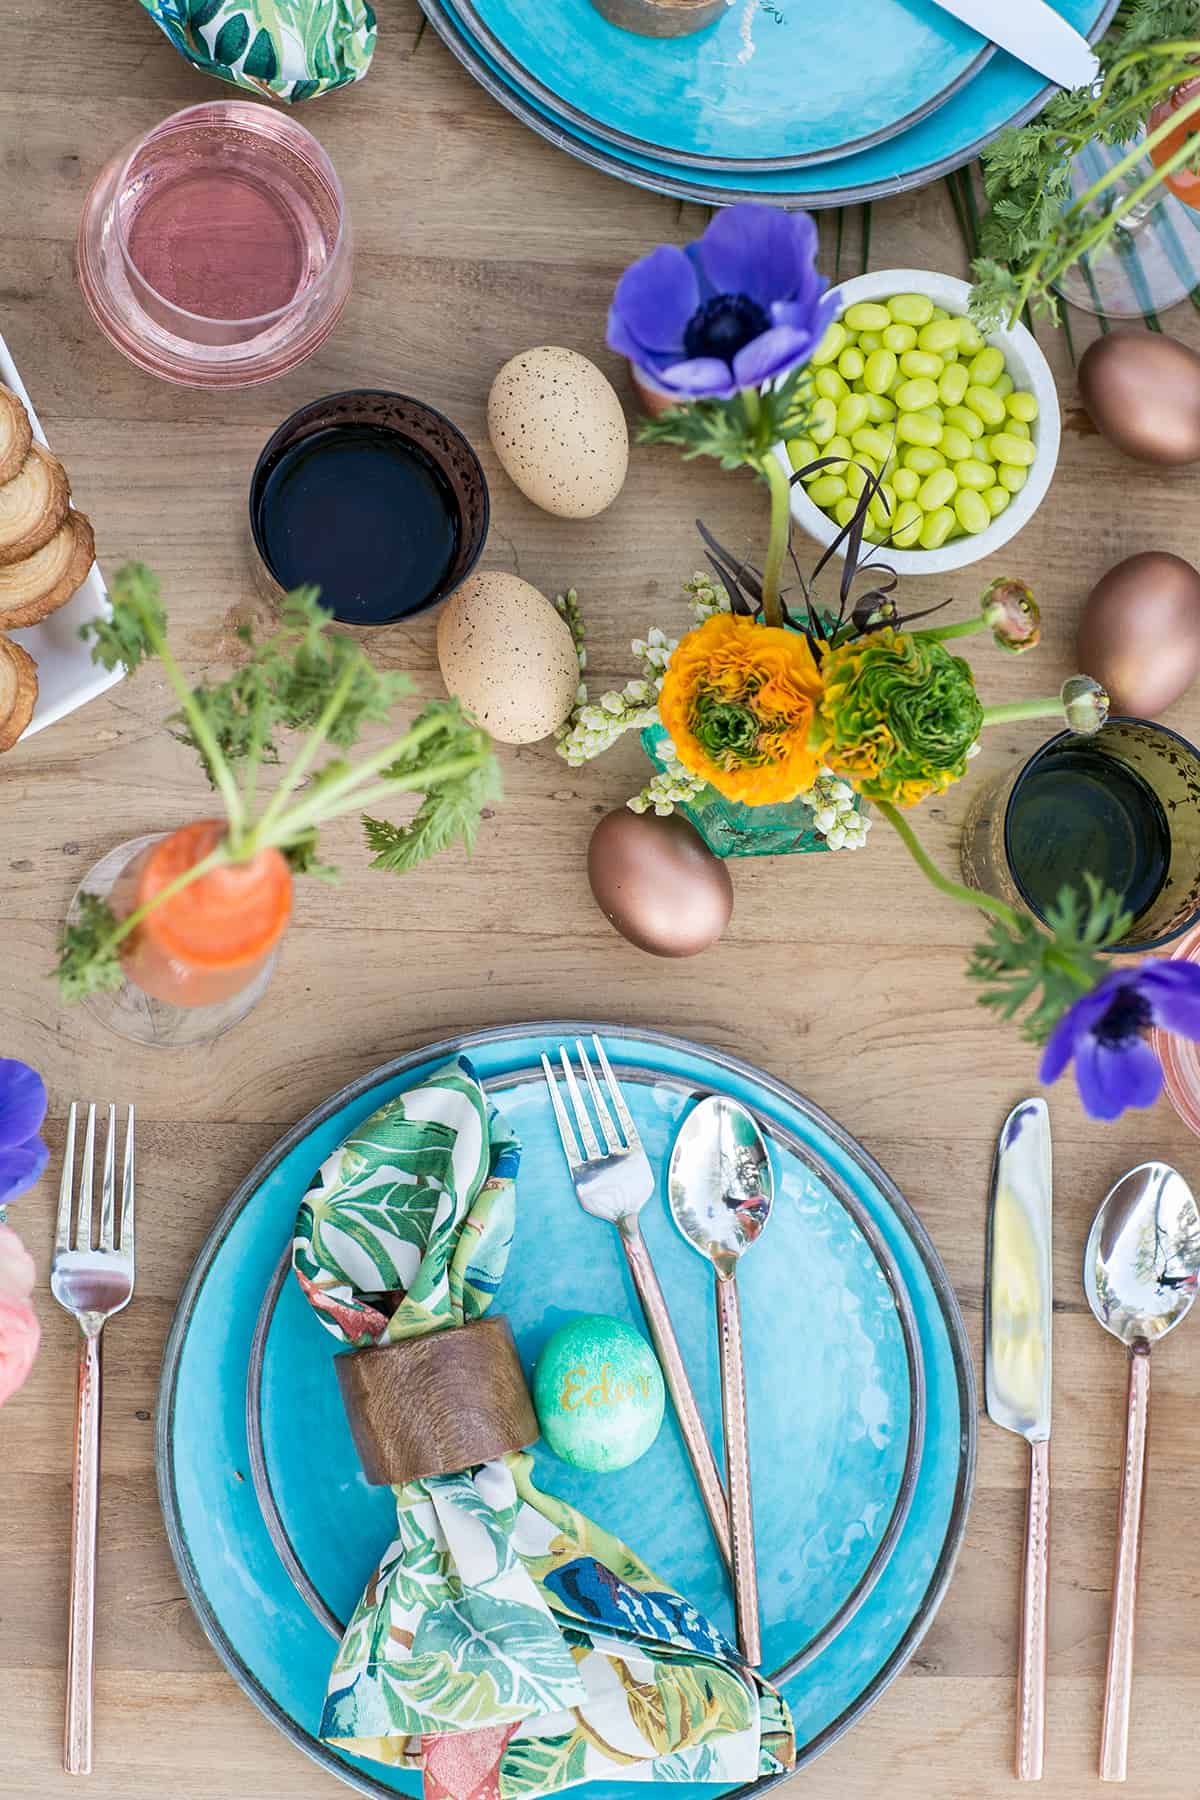 How to set an Easter table setting